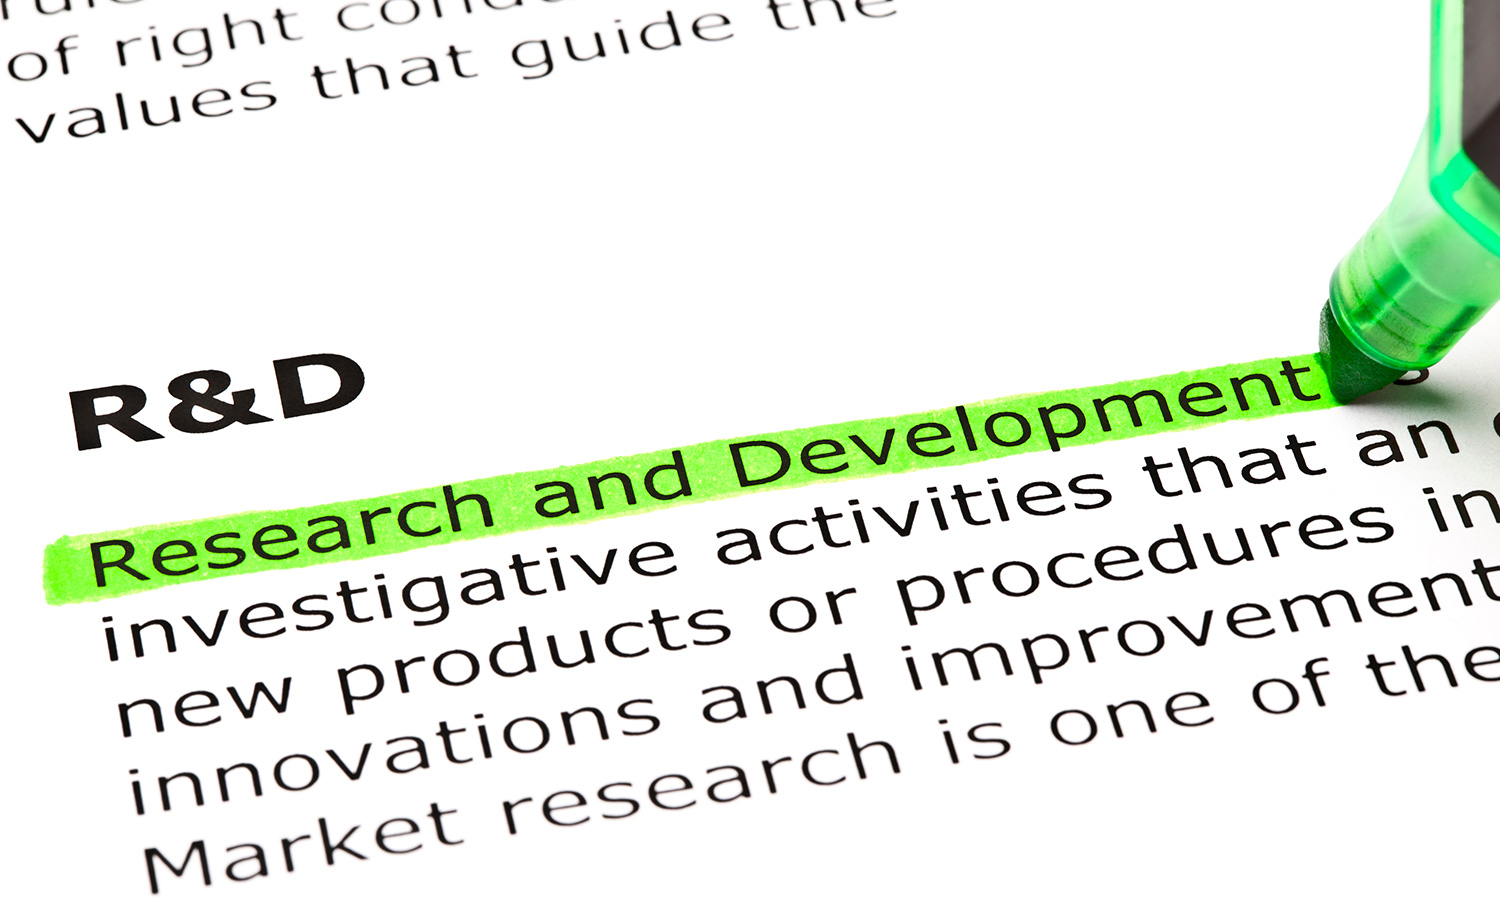 R&D står for Research and development